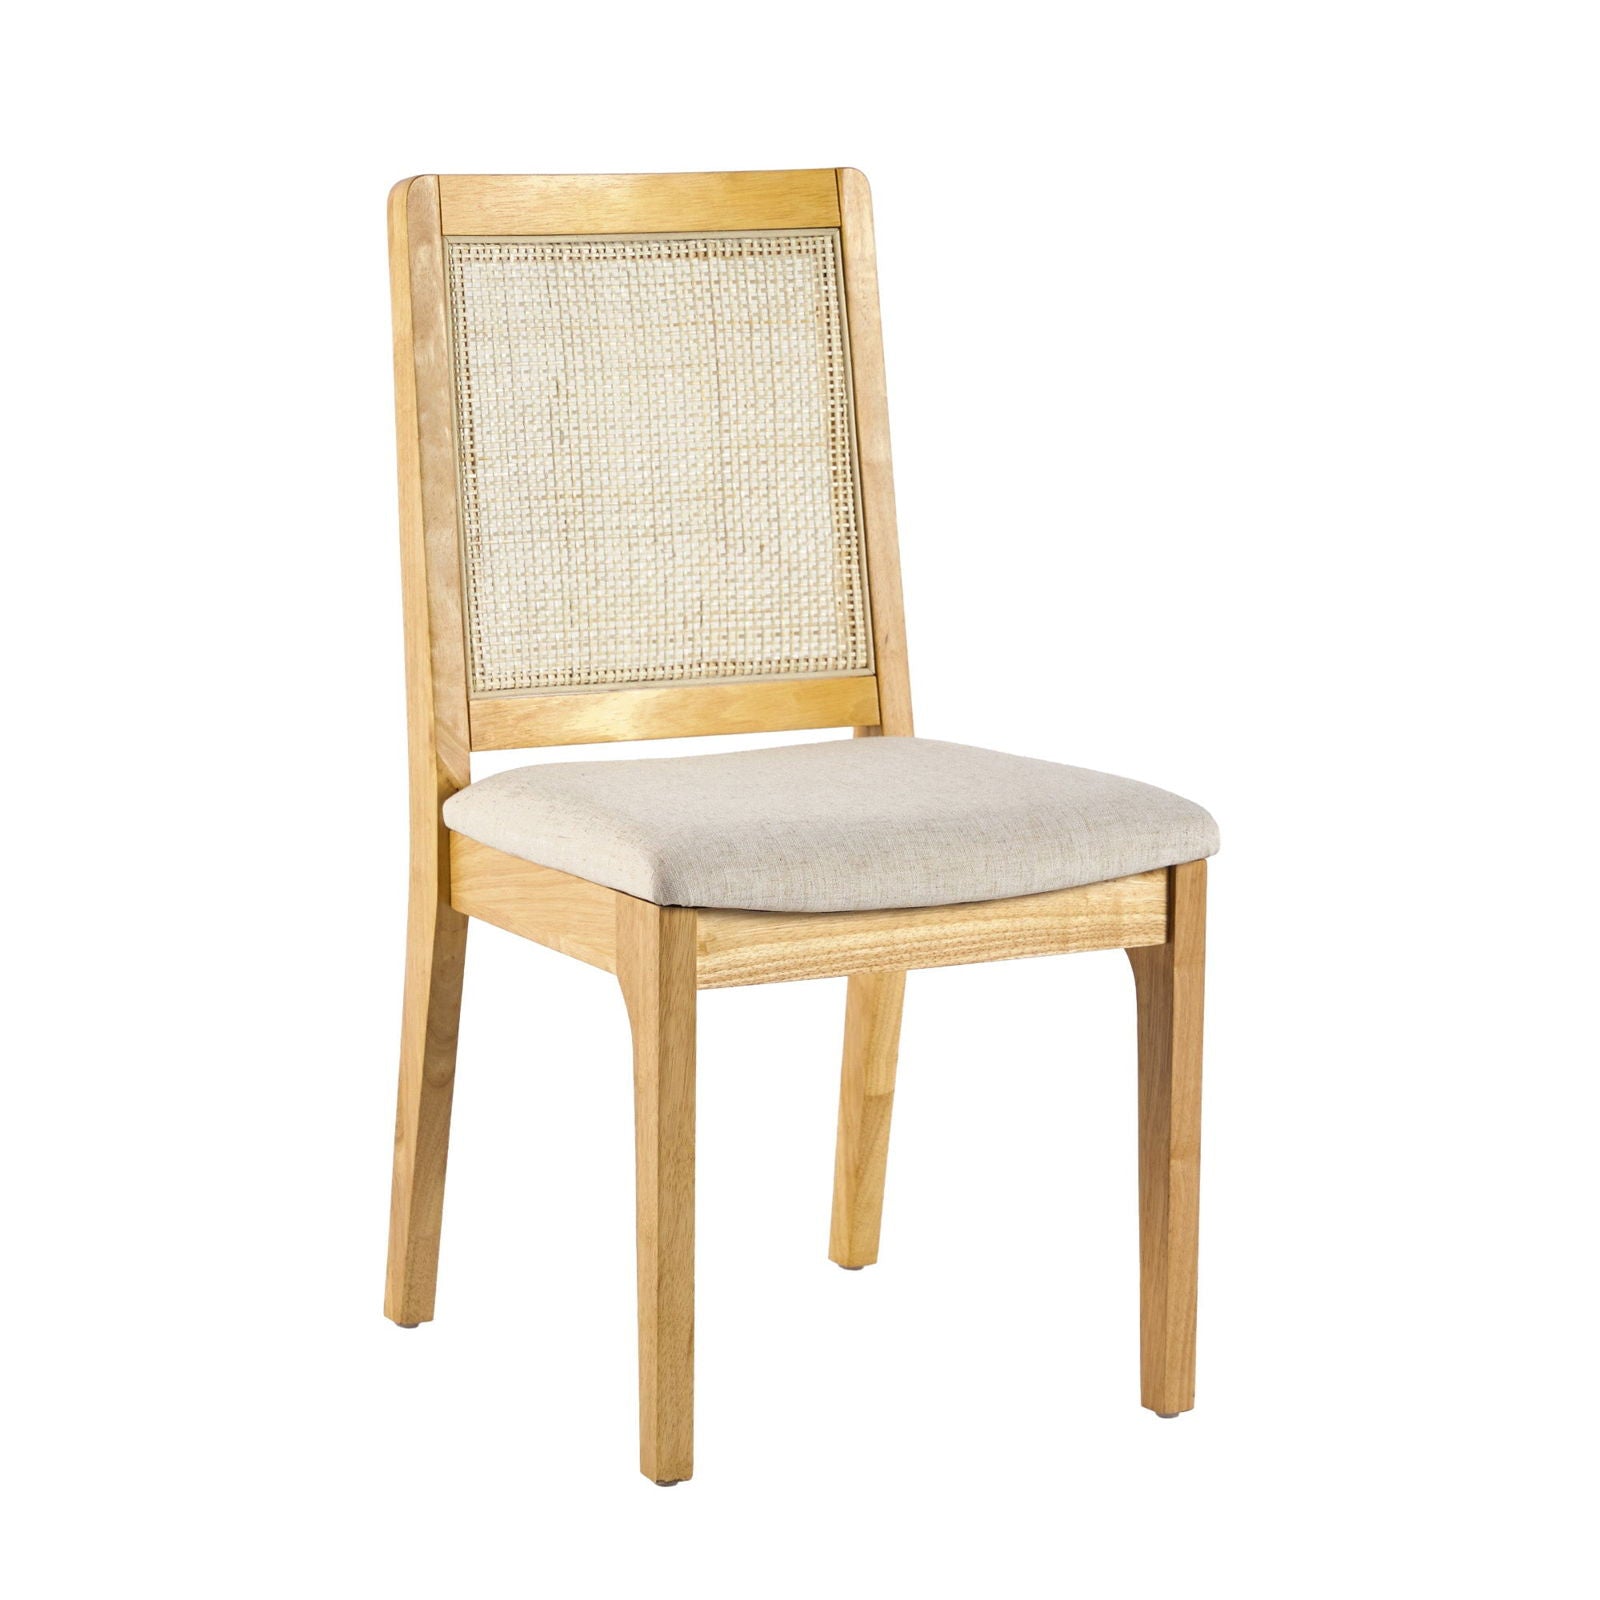 Catalina Solid Wood Dining Chair with Rattan Inset Back, Set of 2 - Mac & Mabel